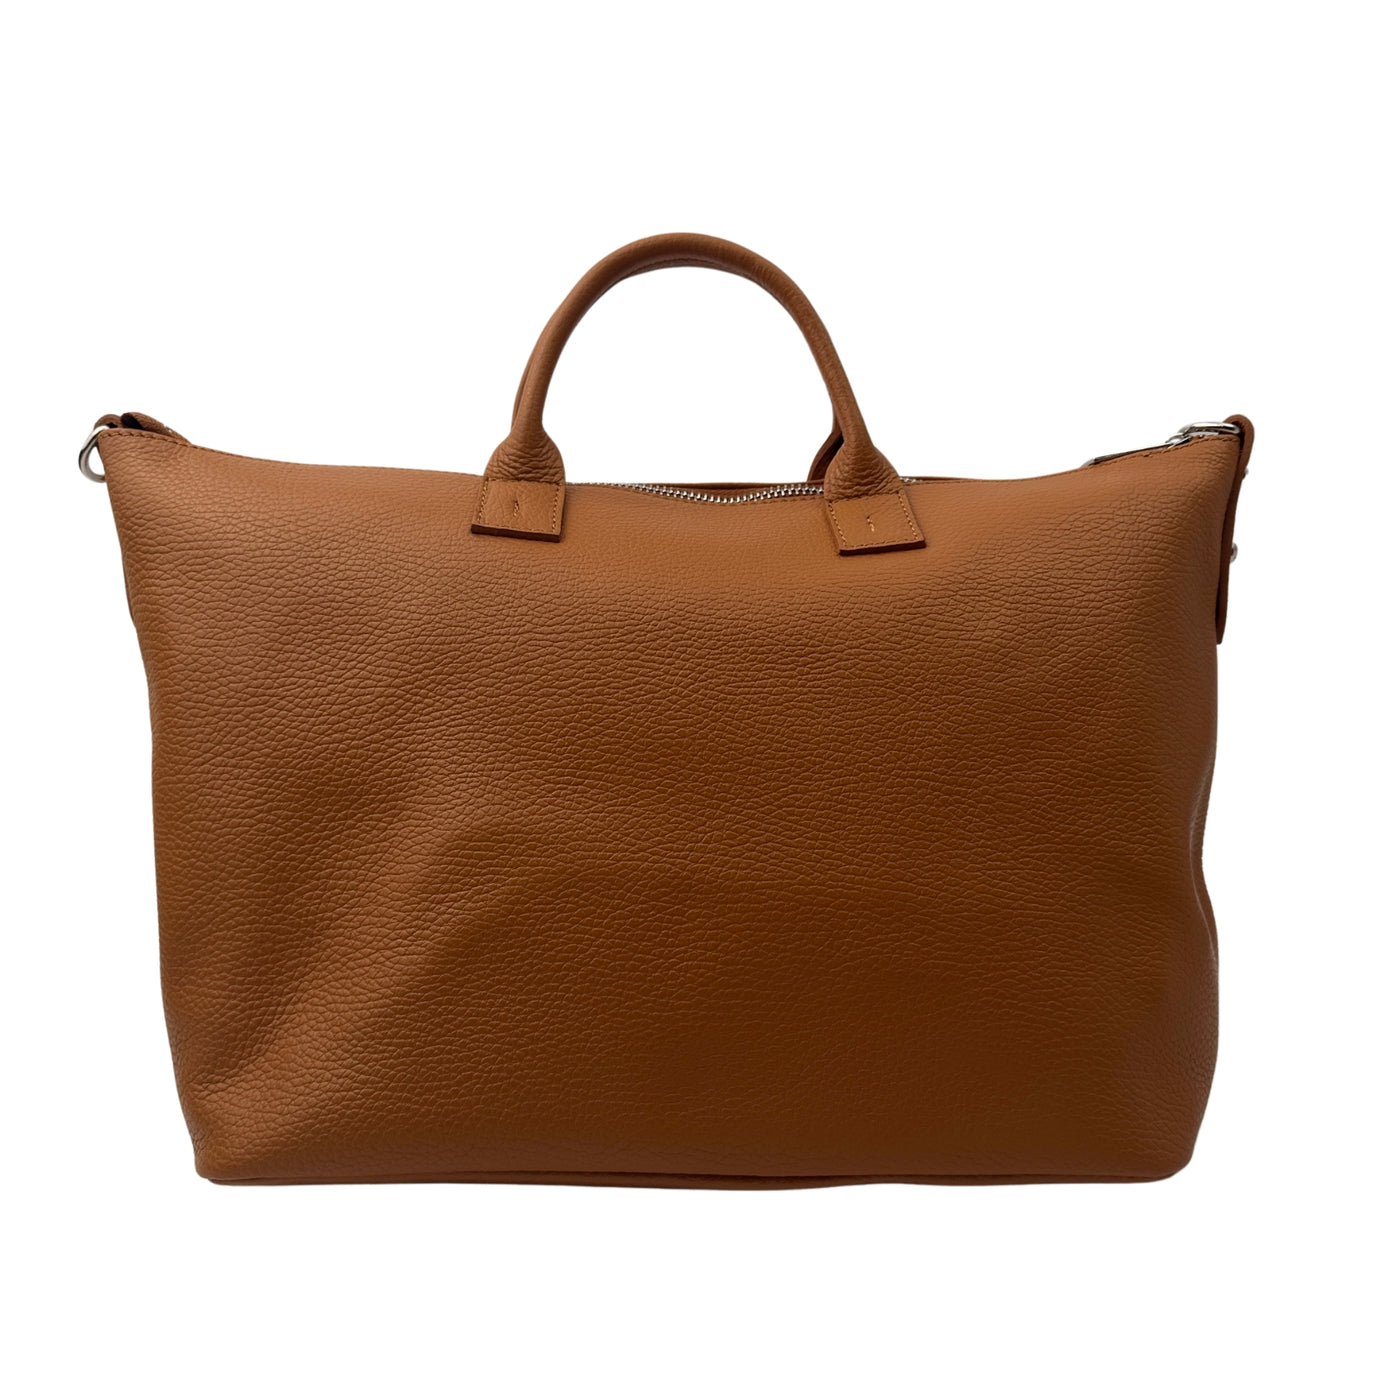 Shopping bag/computer bag in soft leather different colors